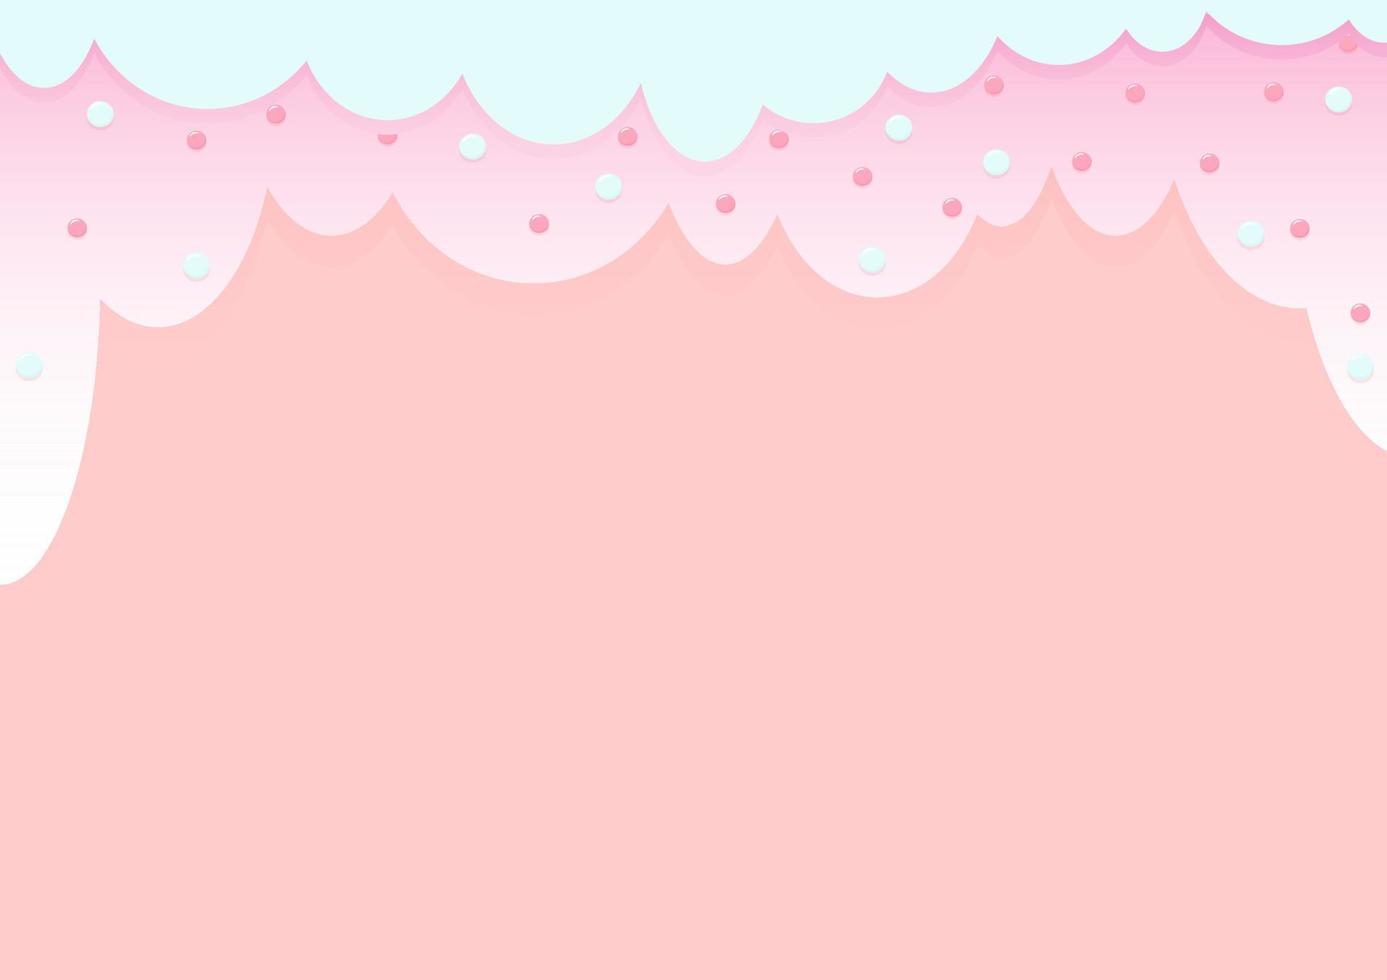 Pink solid color background with a blue drip on top and sprinkles vector